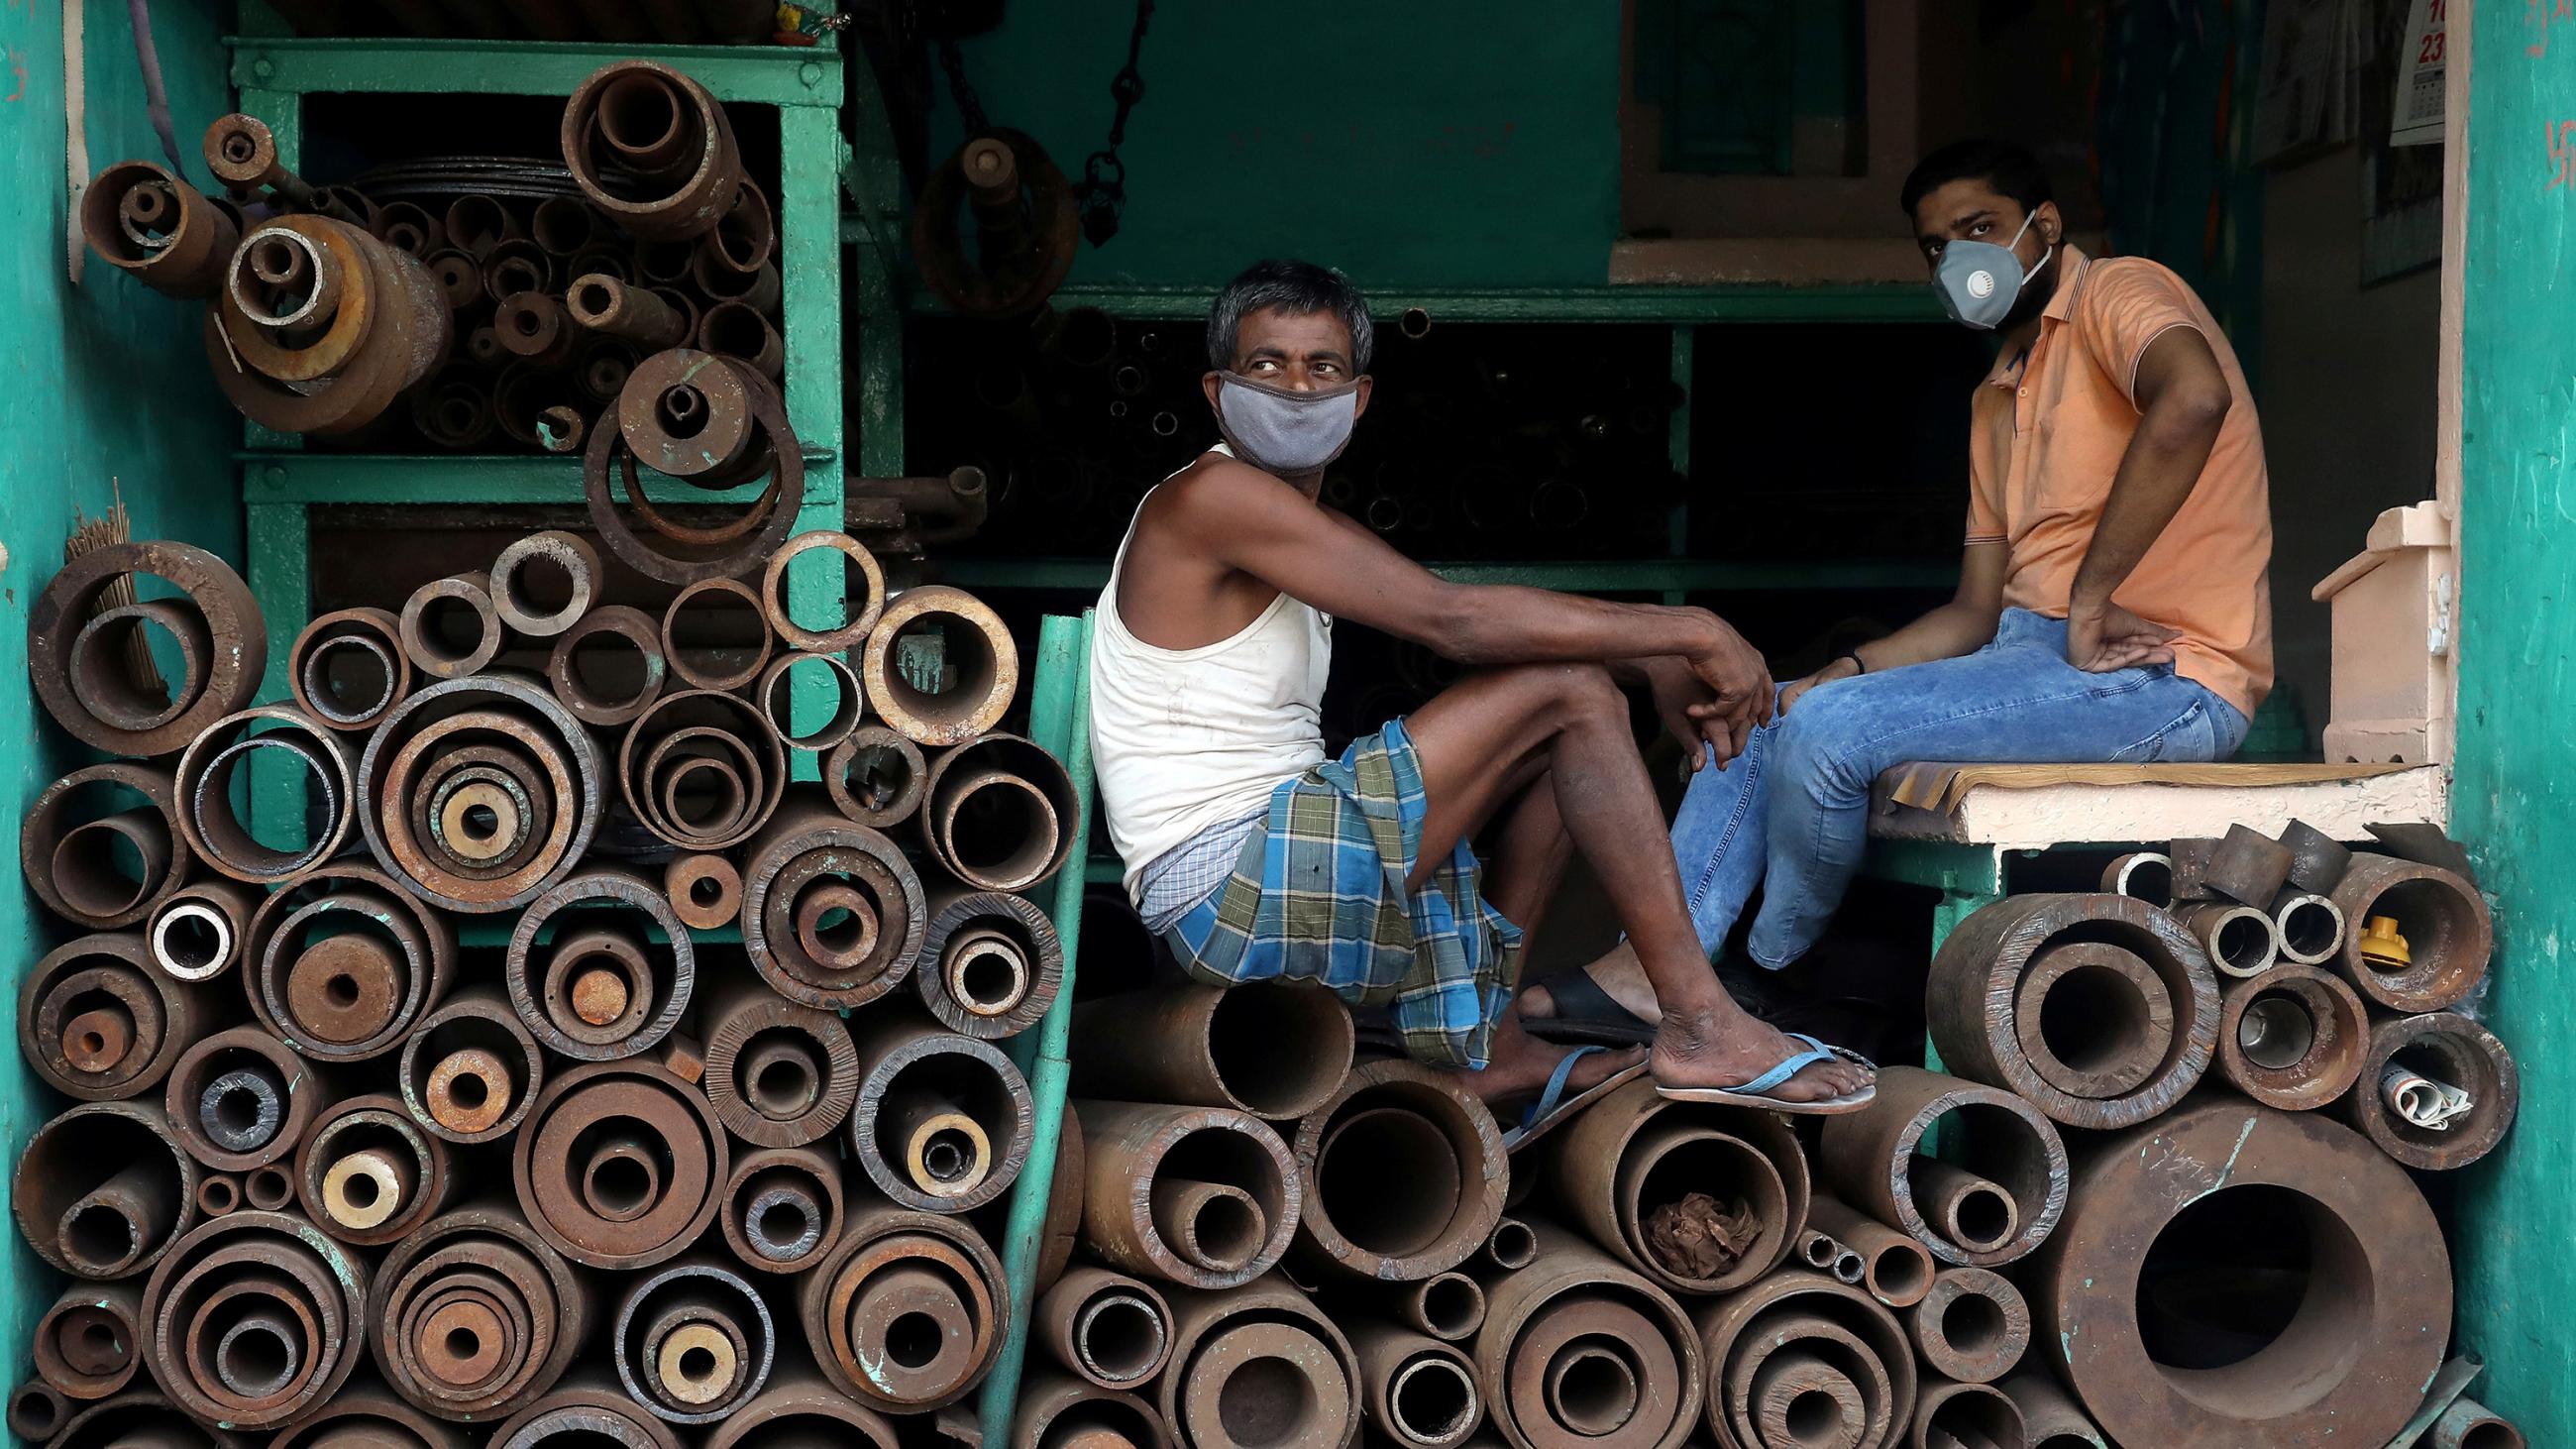 This is a striking photo with two men sitting on stacked metal pipes wearing masks. 